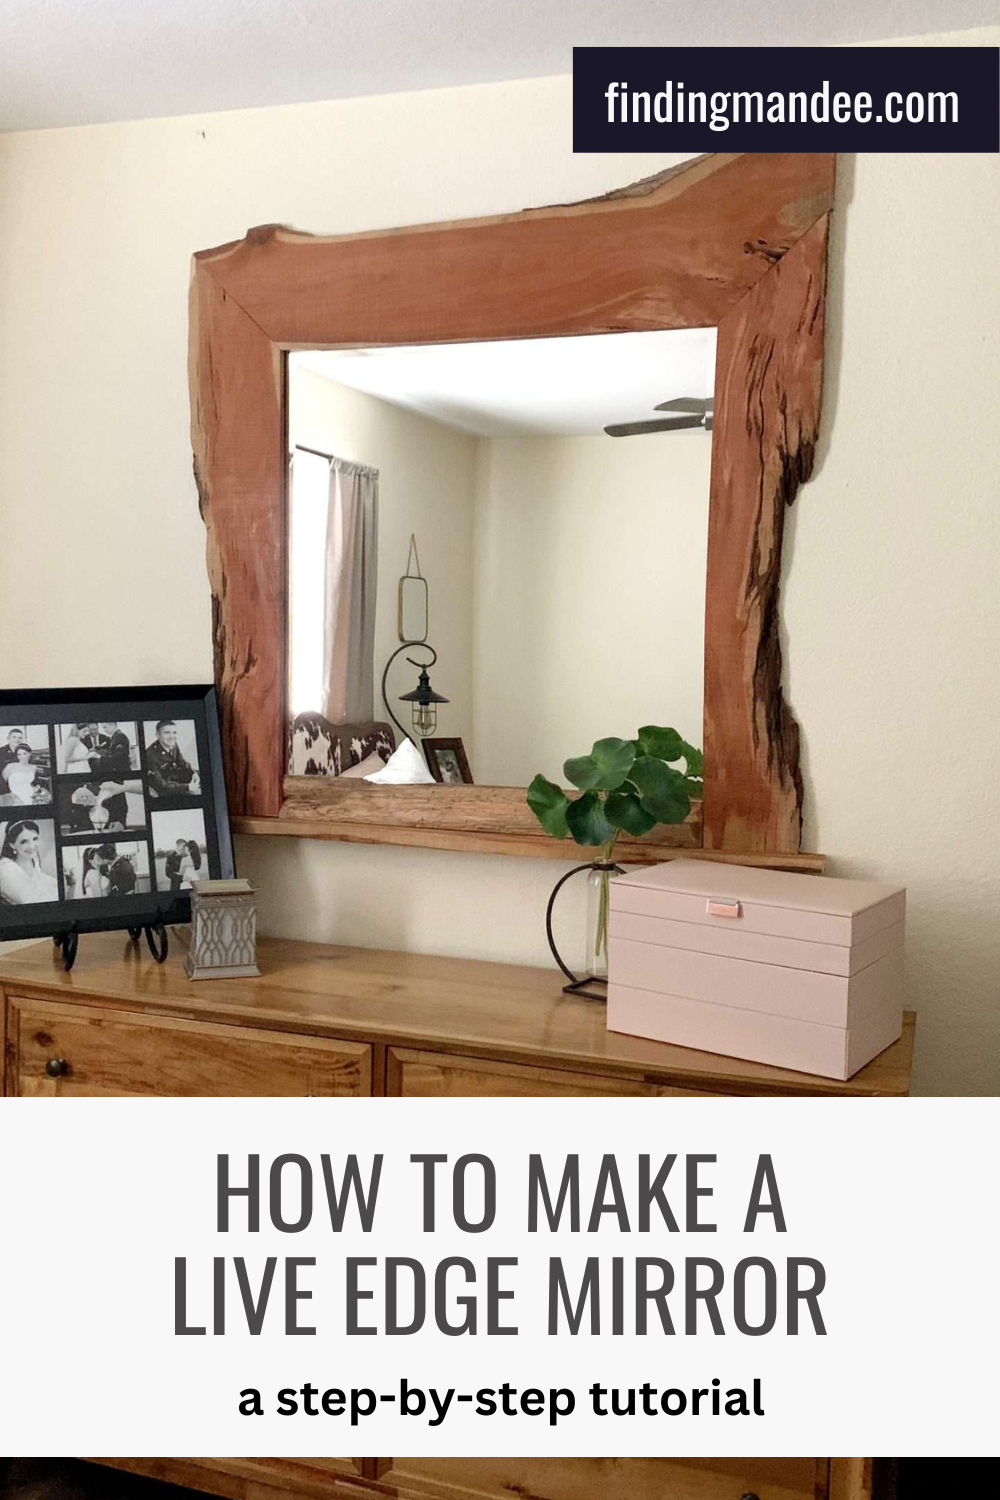 How to Make a Live Edge Mirror | Finding Mandee